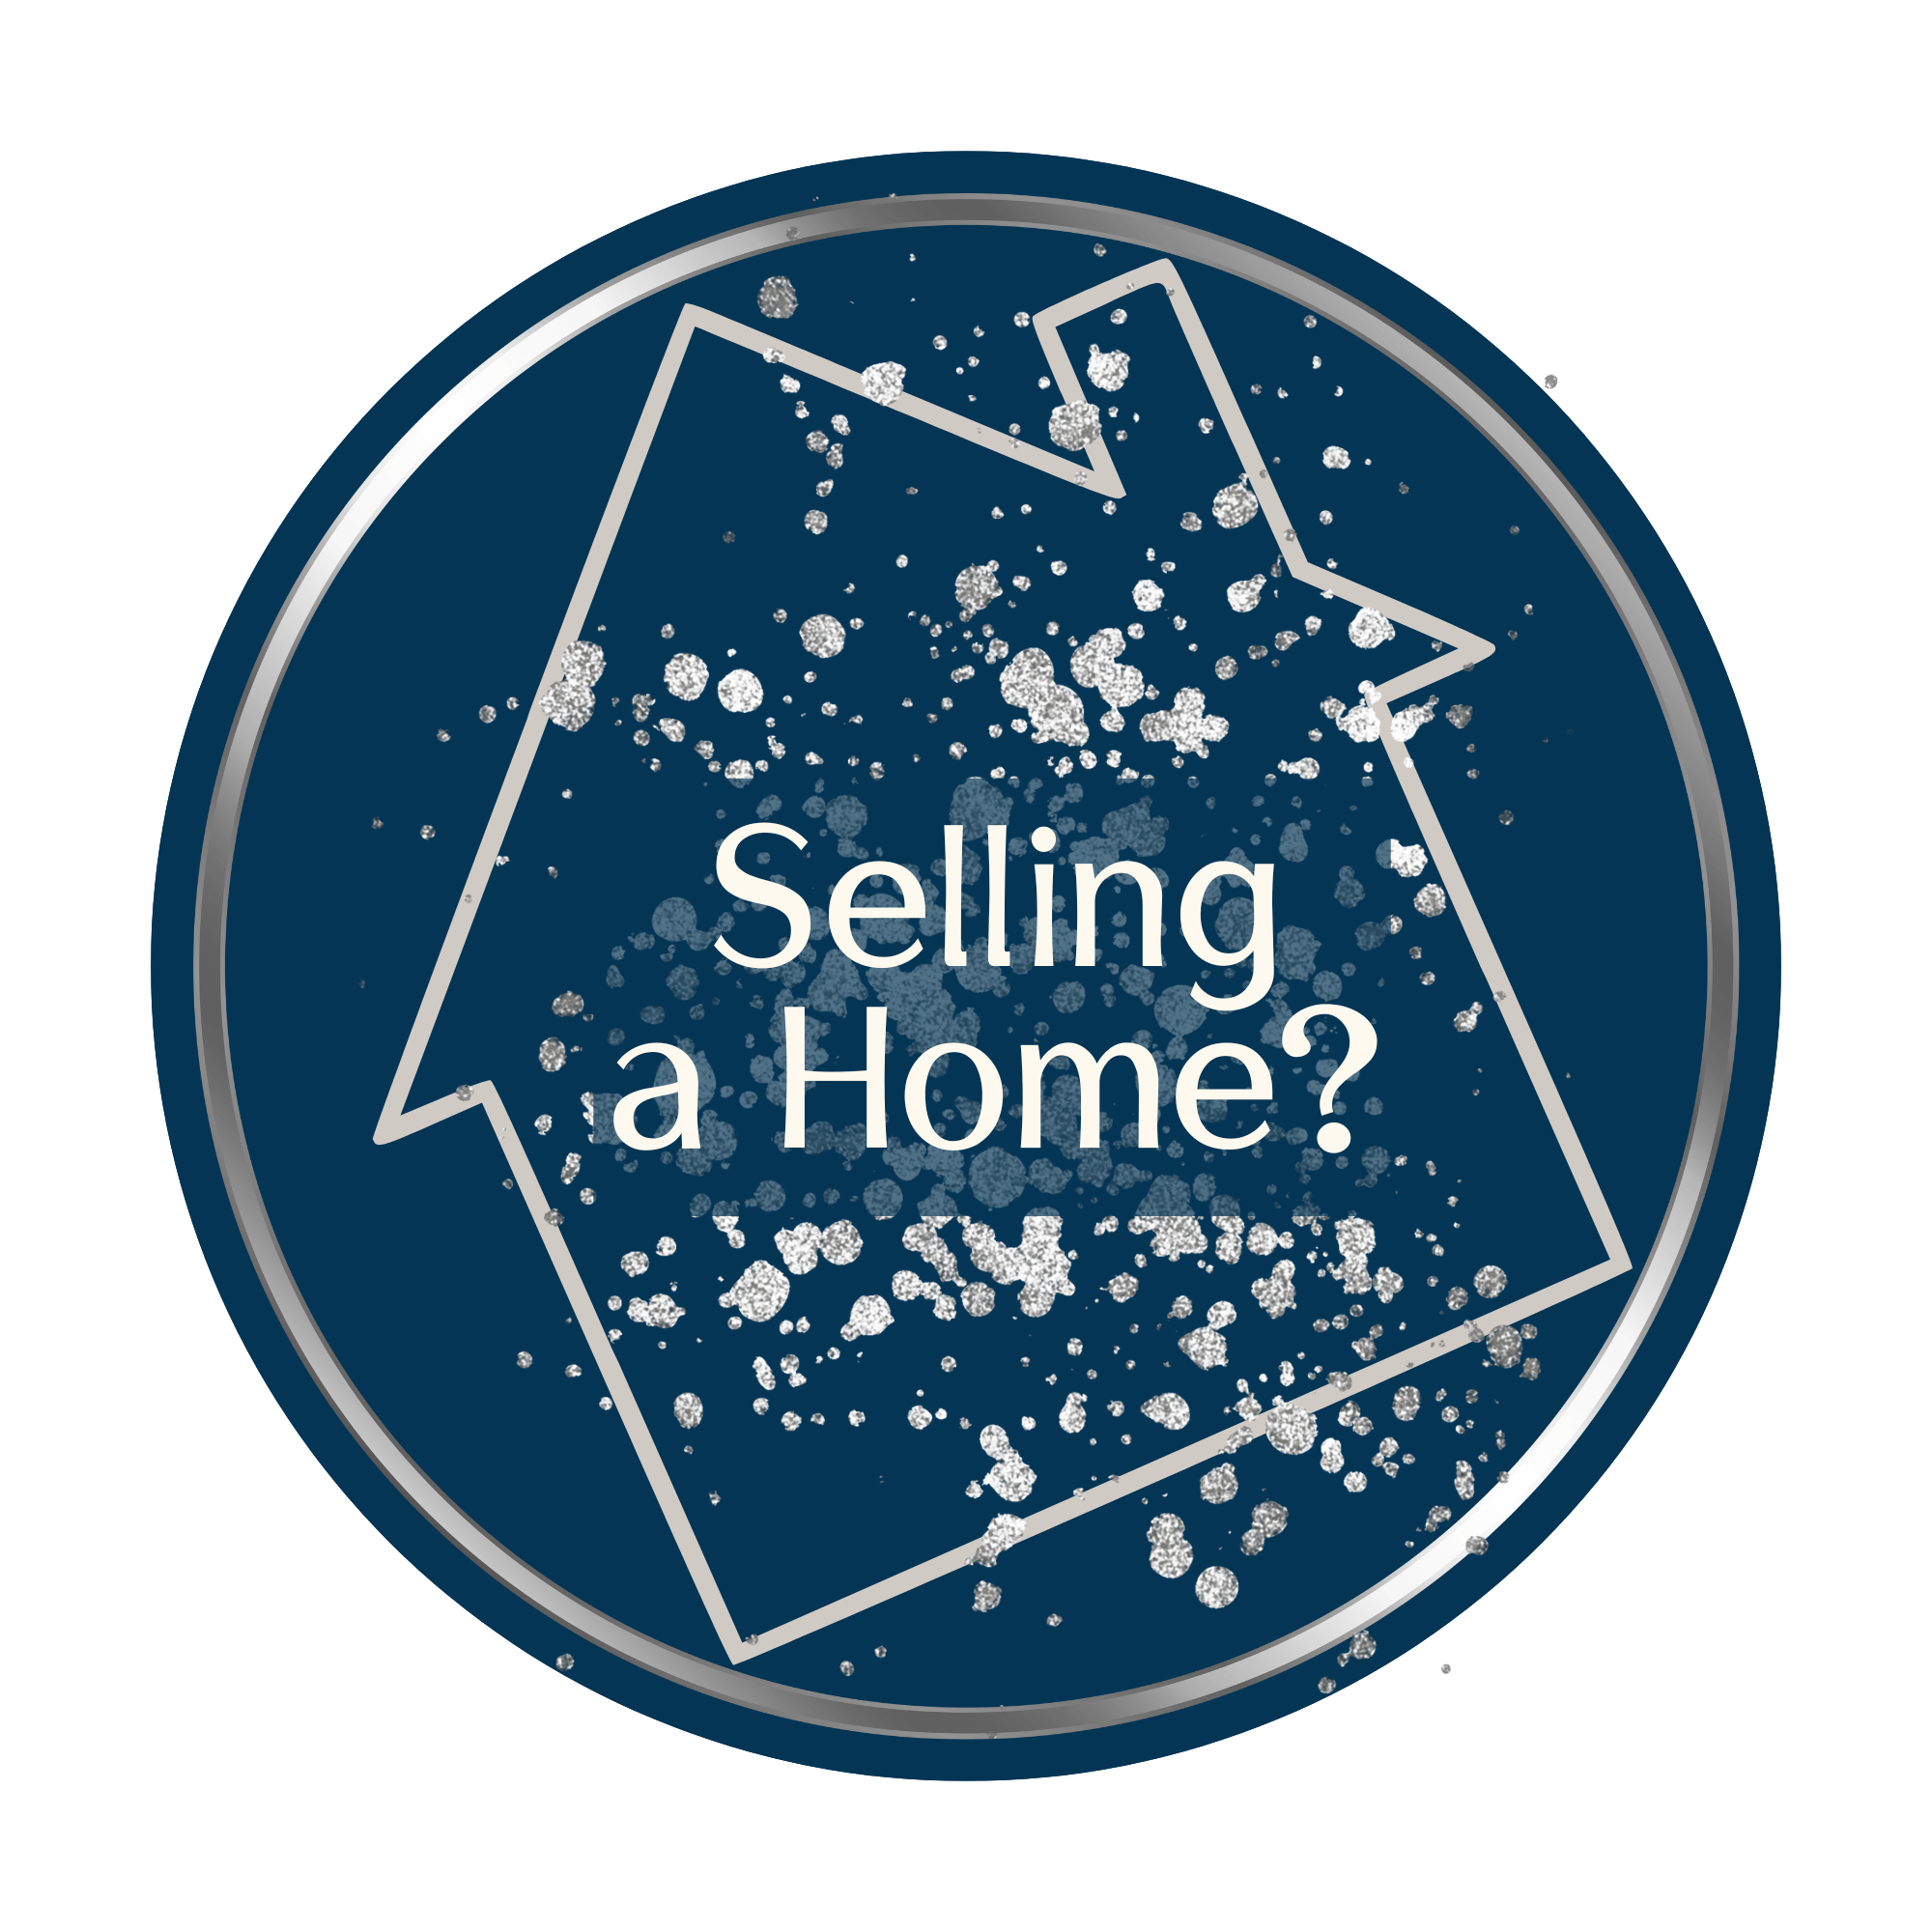 Selling a Home, Diane Florio, Real Estate, Curb Appeal, Research Triangle, Wake Forest, Raleigh, Durham, Coastal NC, North Carolina, Tips and Tricks, Home Décor, Listing a Home, Selling a Home, Buying a Home, Buyers Agent, Sellers Agent, Licensed Real Estate Agent